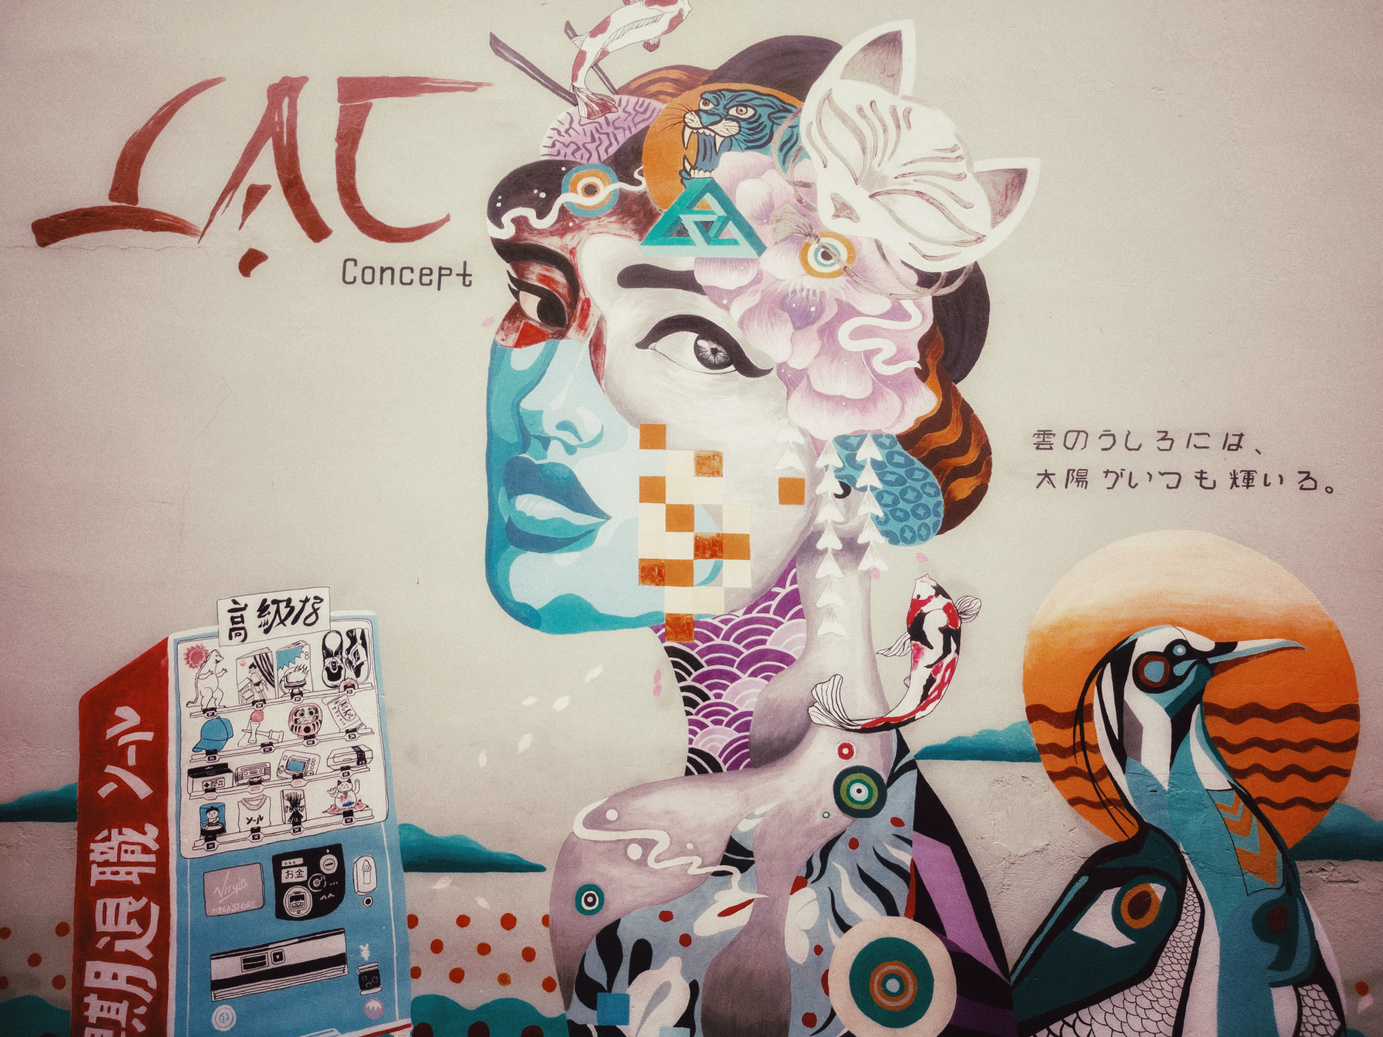 lac concept painting on the wall with an abstract woman, a bird, a vending machine, and the sun in japanese style